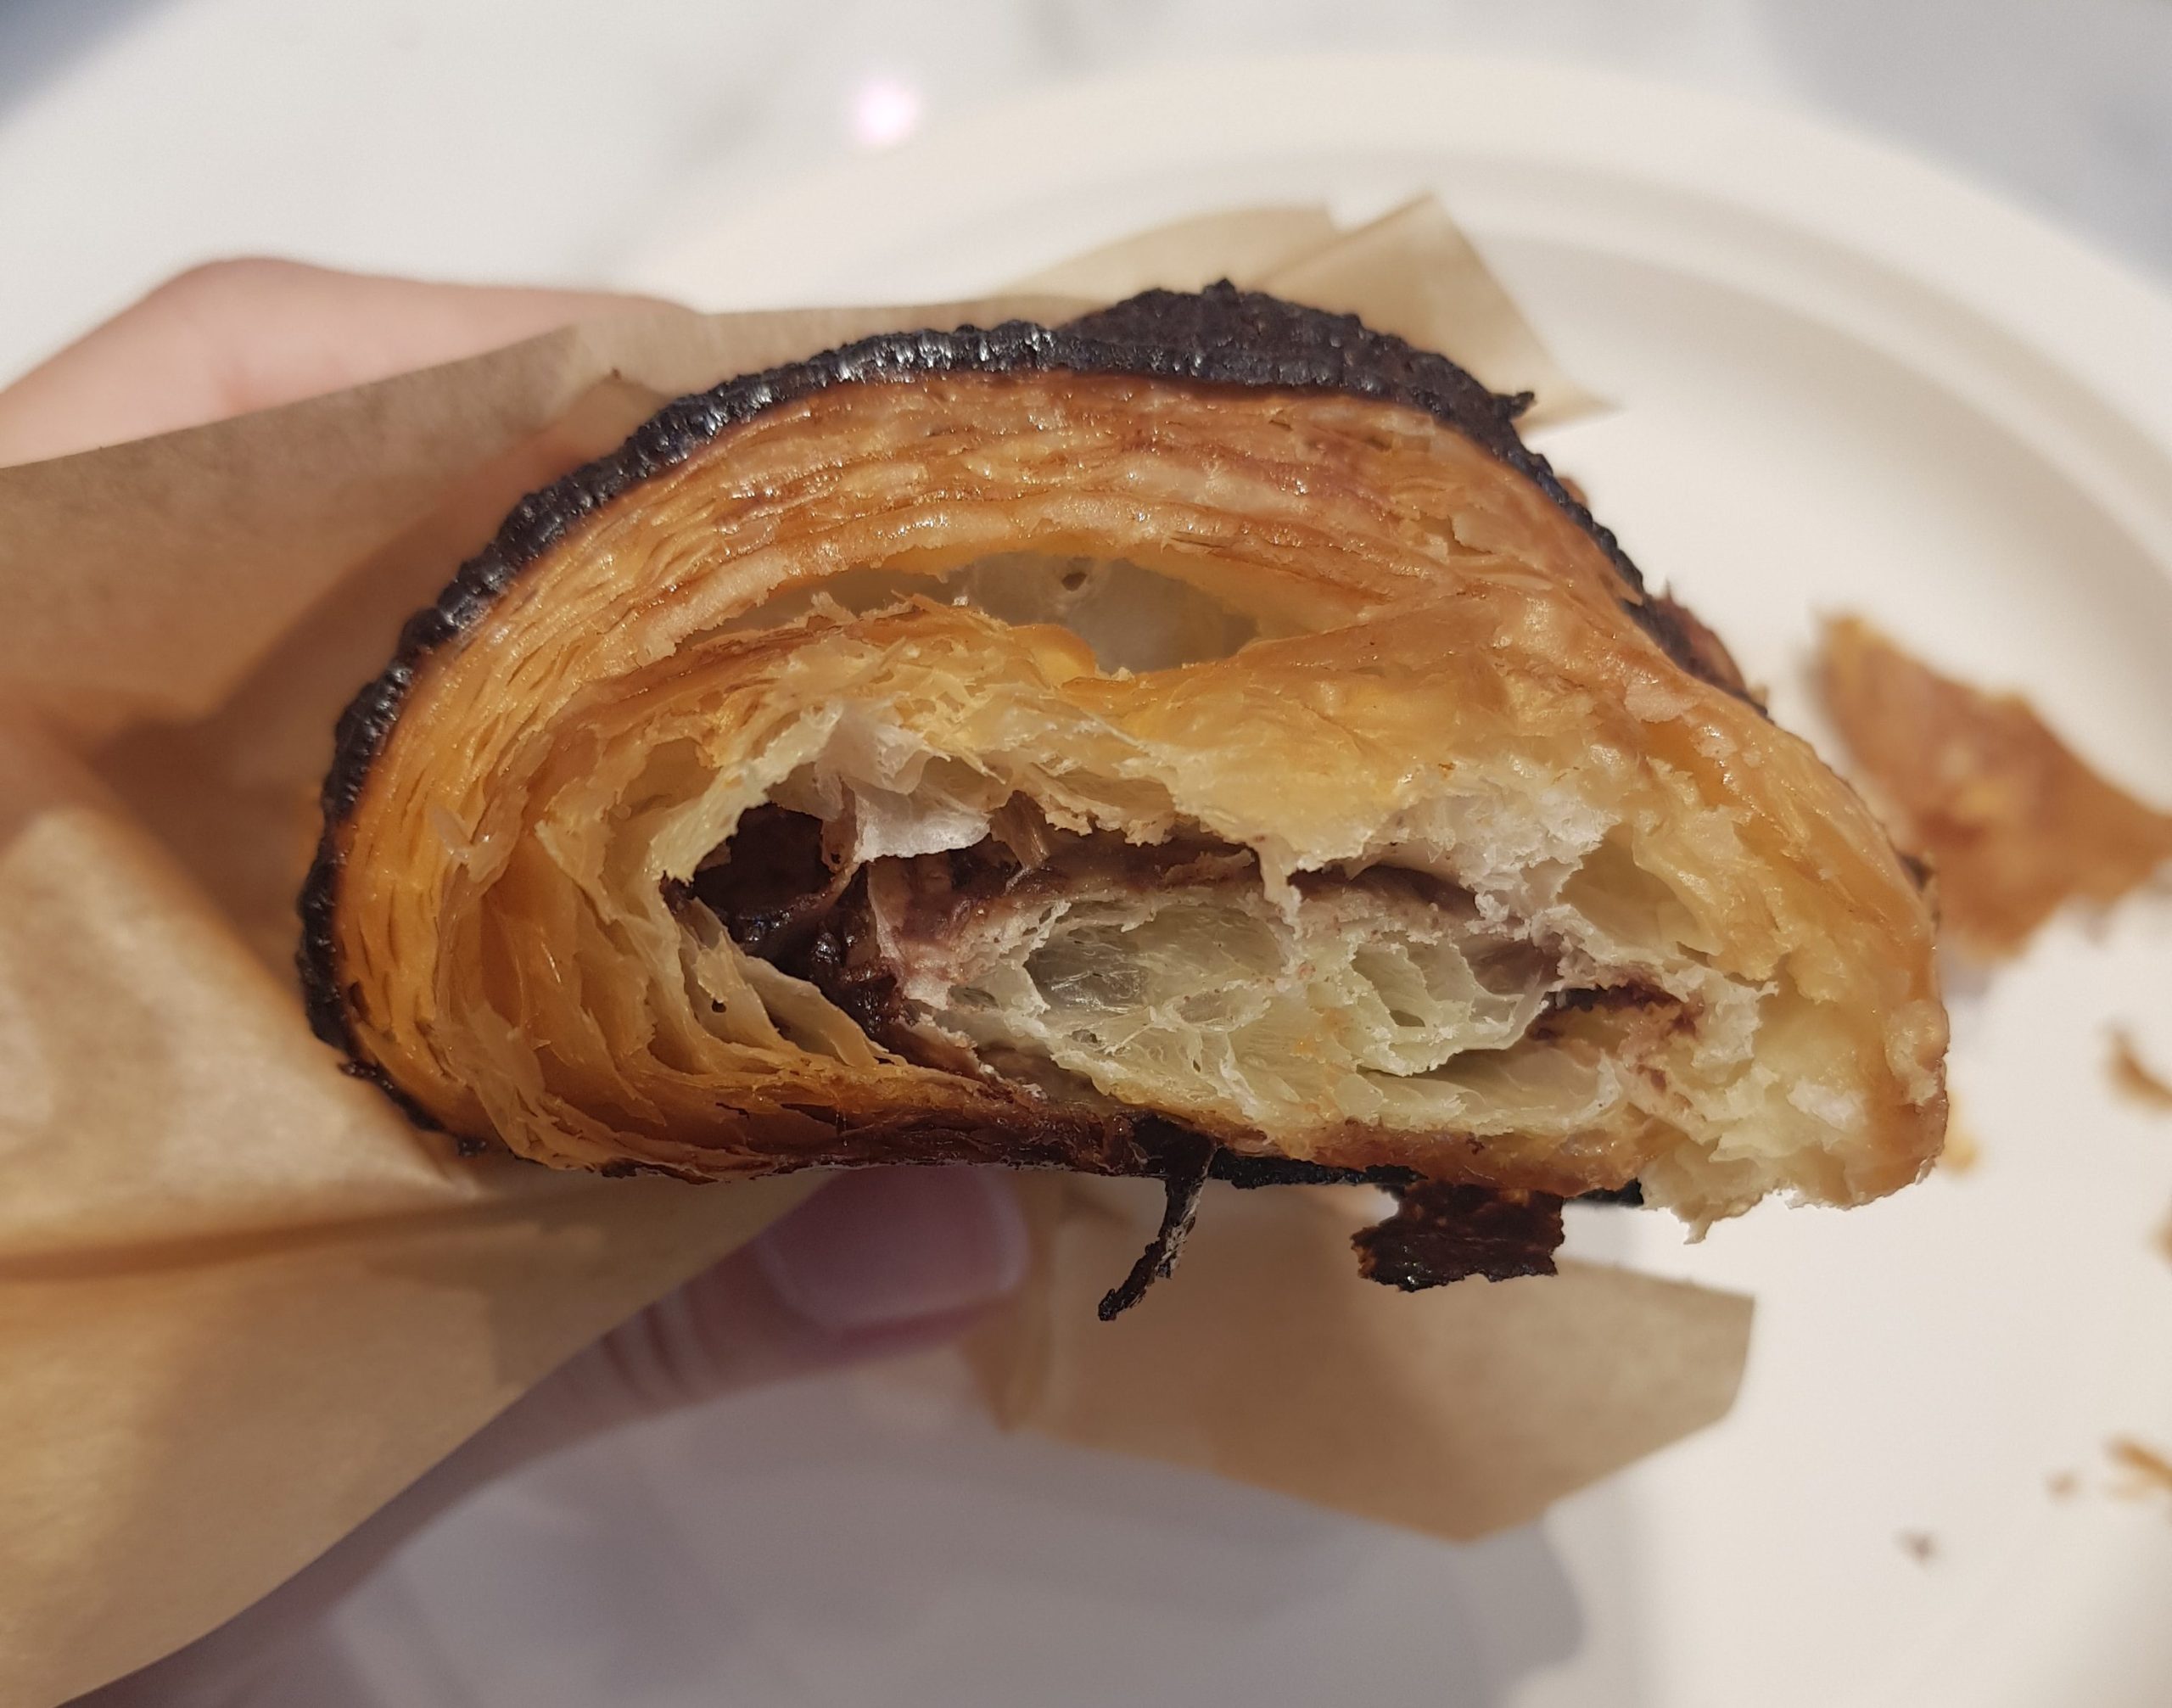 Chocolate French pastry